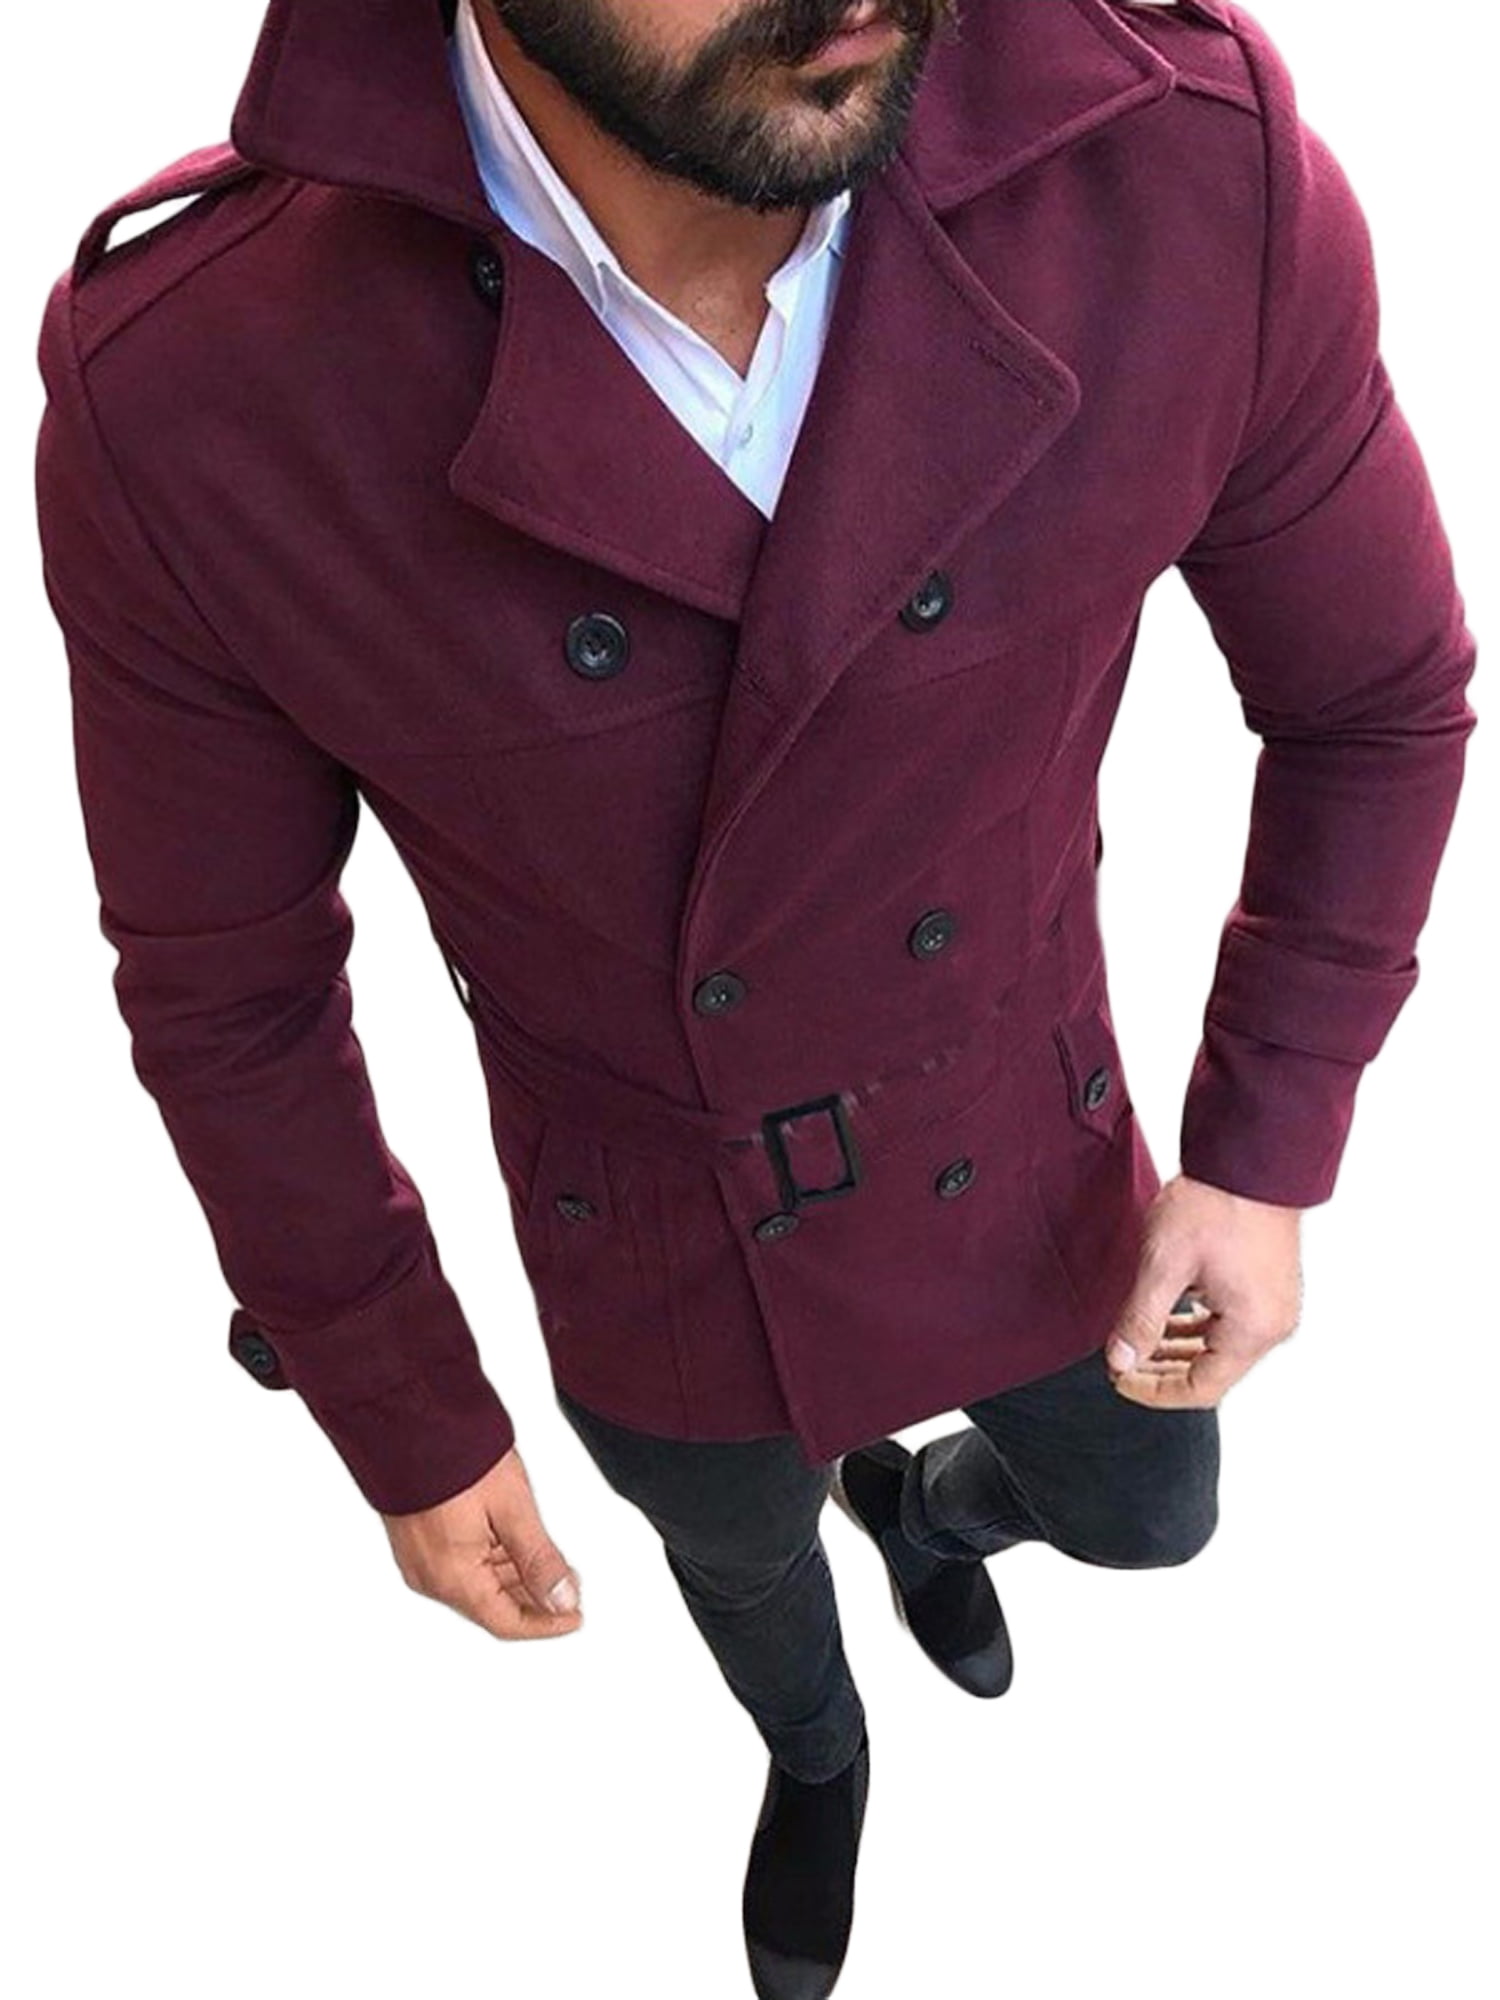 Men's Winter Casual Jackets Slim Fit Double Breasted Trench Coat Windbreaker New 